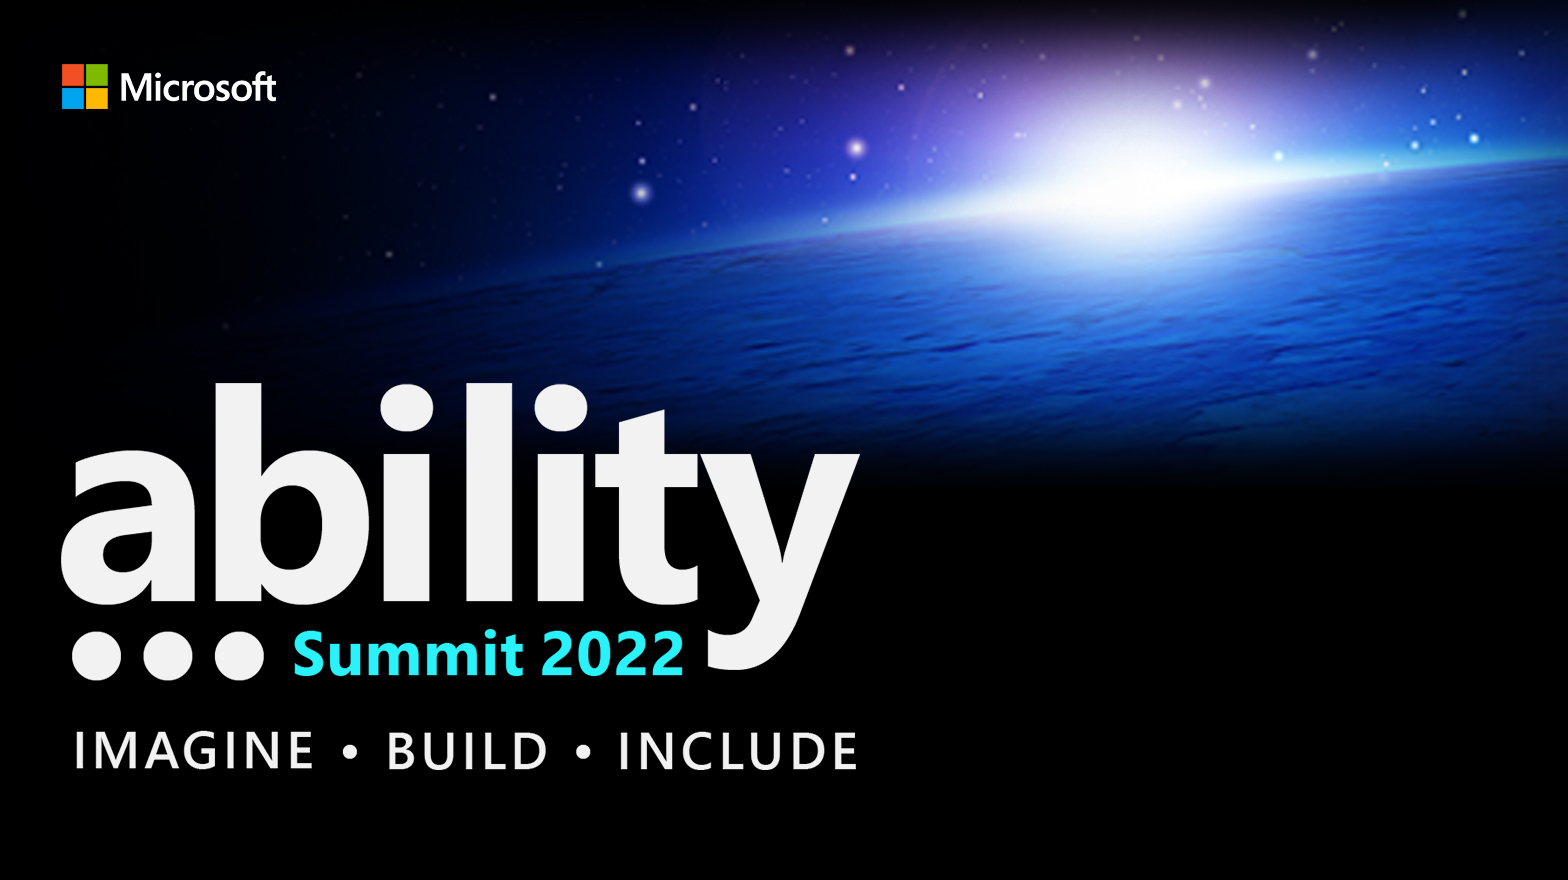 Ability Summit 2022 - Image, Build, Include